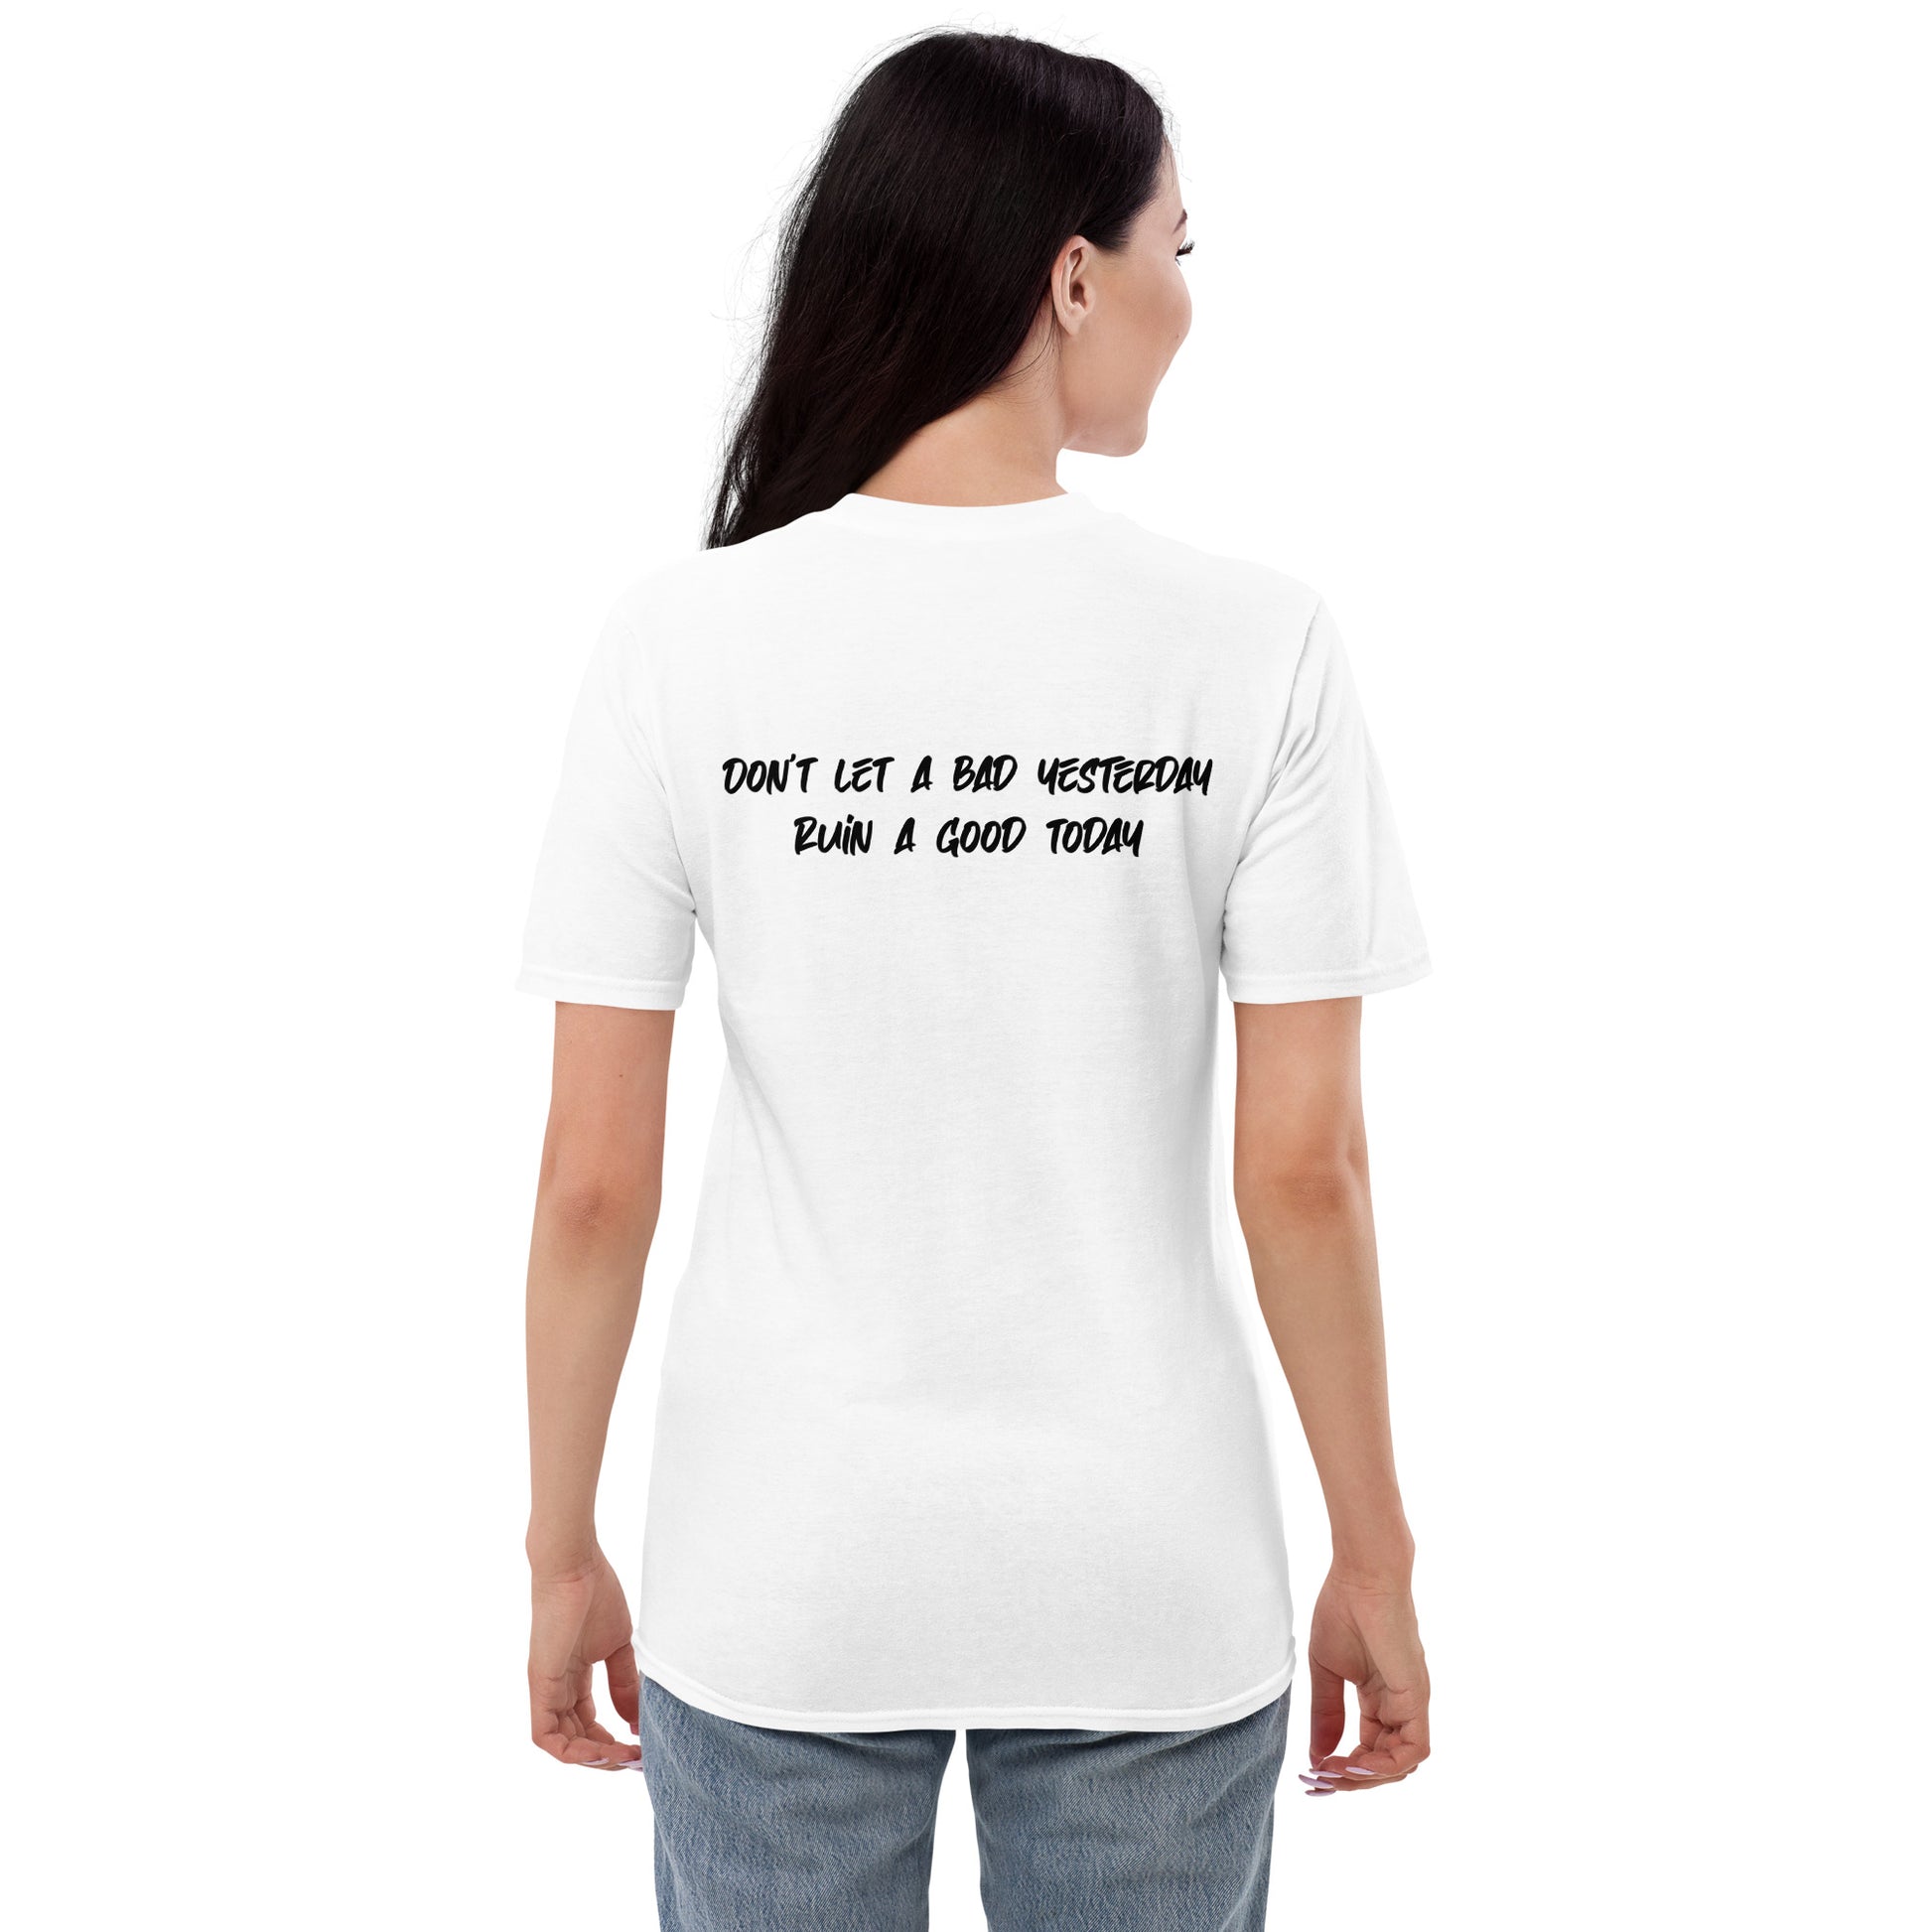 Tribe of Weirdos' inspiring 'Don't Let A Bad Yesterday Ruin A Good Today' Unisex T-Shirt, embodying resilience and optimism.